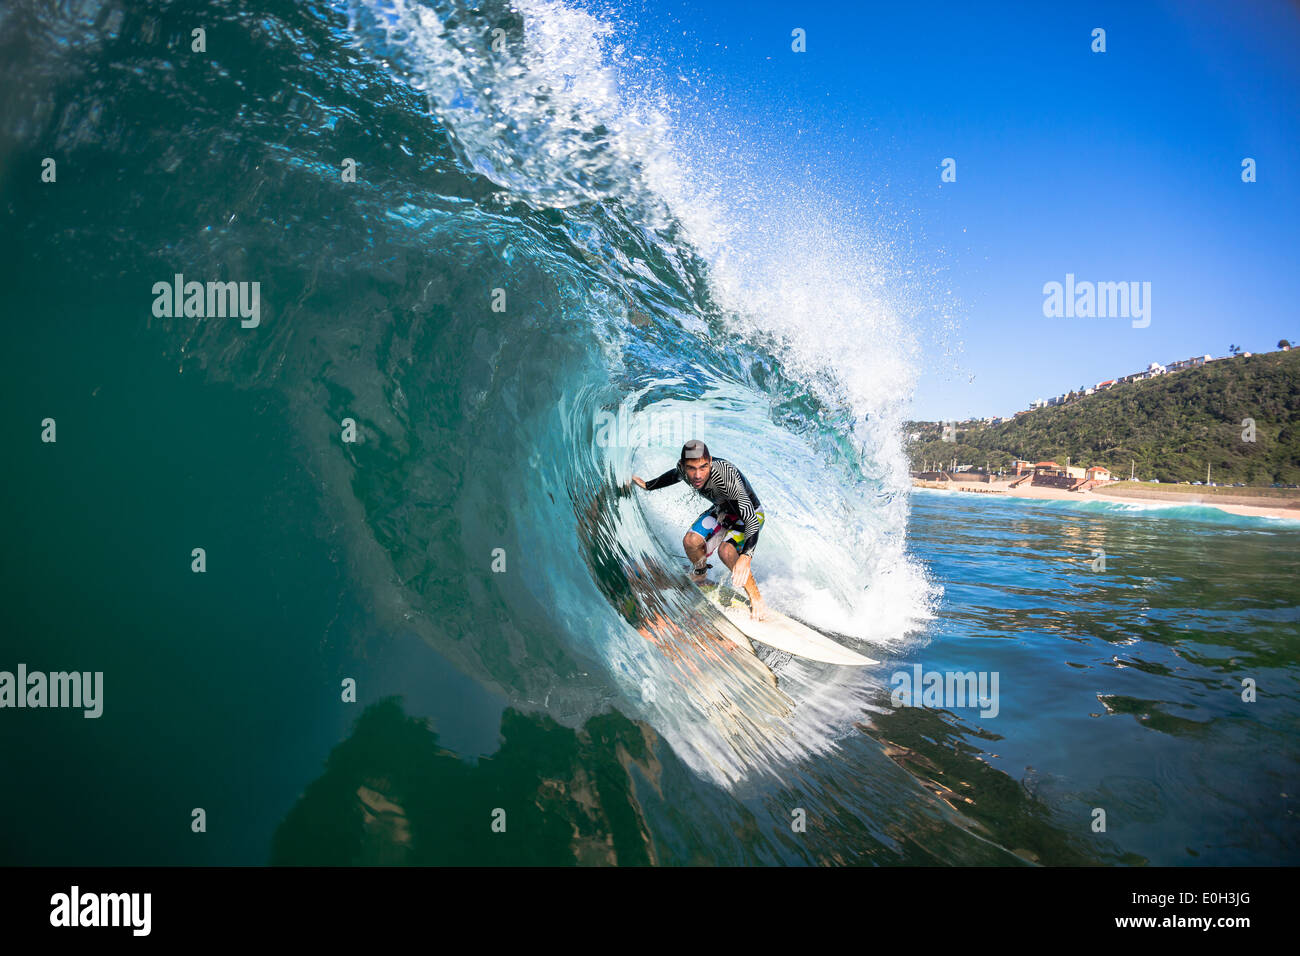 Surfing Surfer tube rides hollow blue crashing ocean wave swimming water action photo. Stock Photo